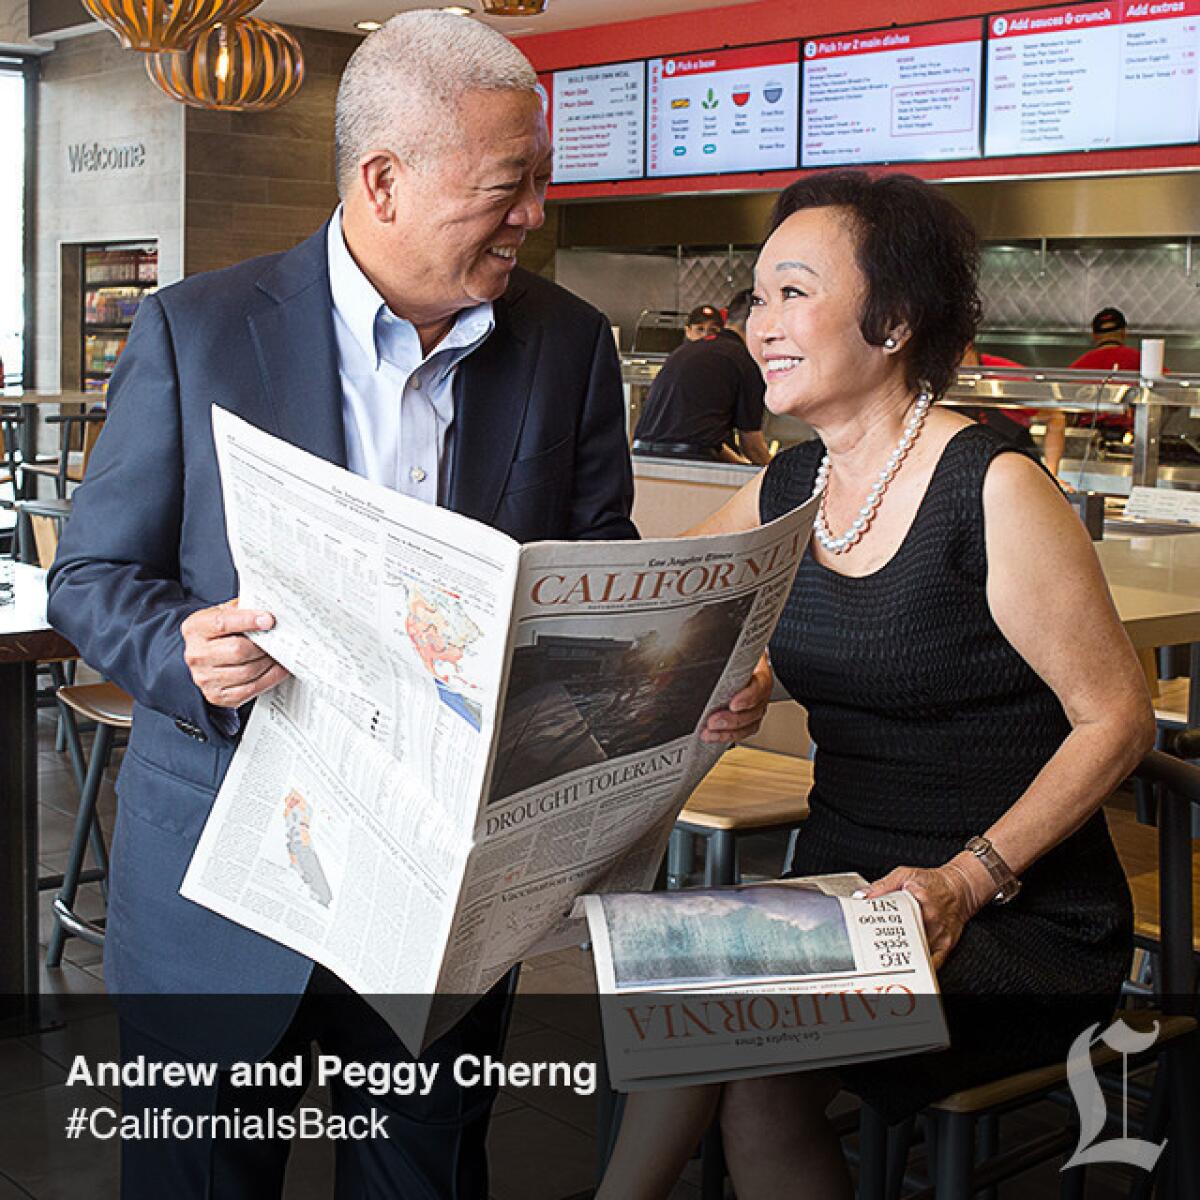 Andrew and Peggy Cherng, Panda Restaurant Group, Inc.